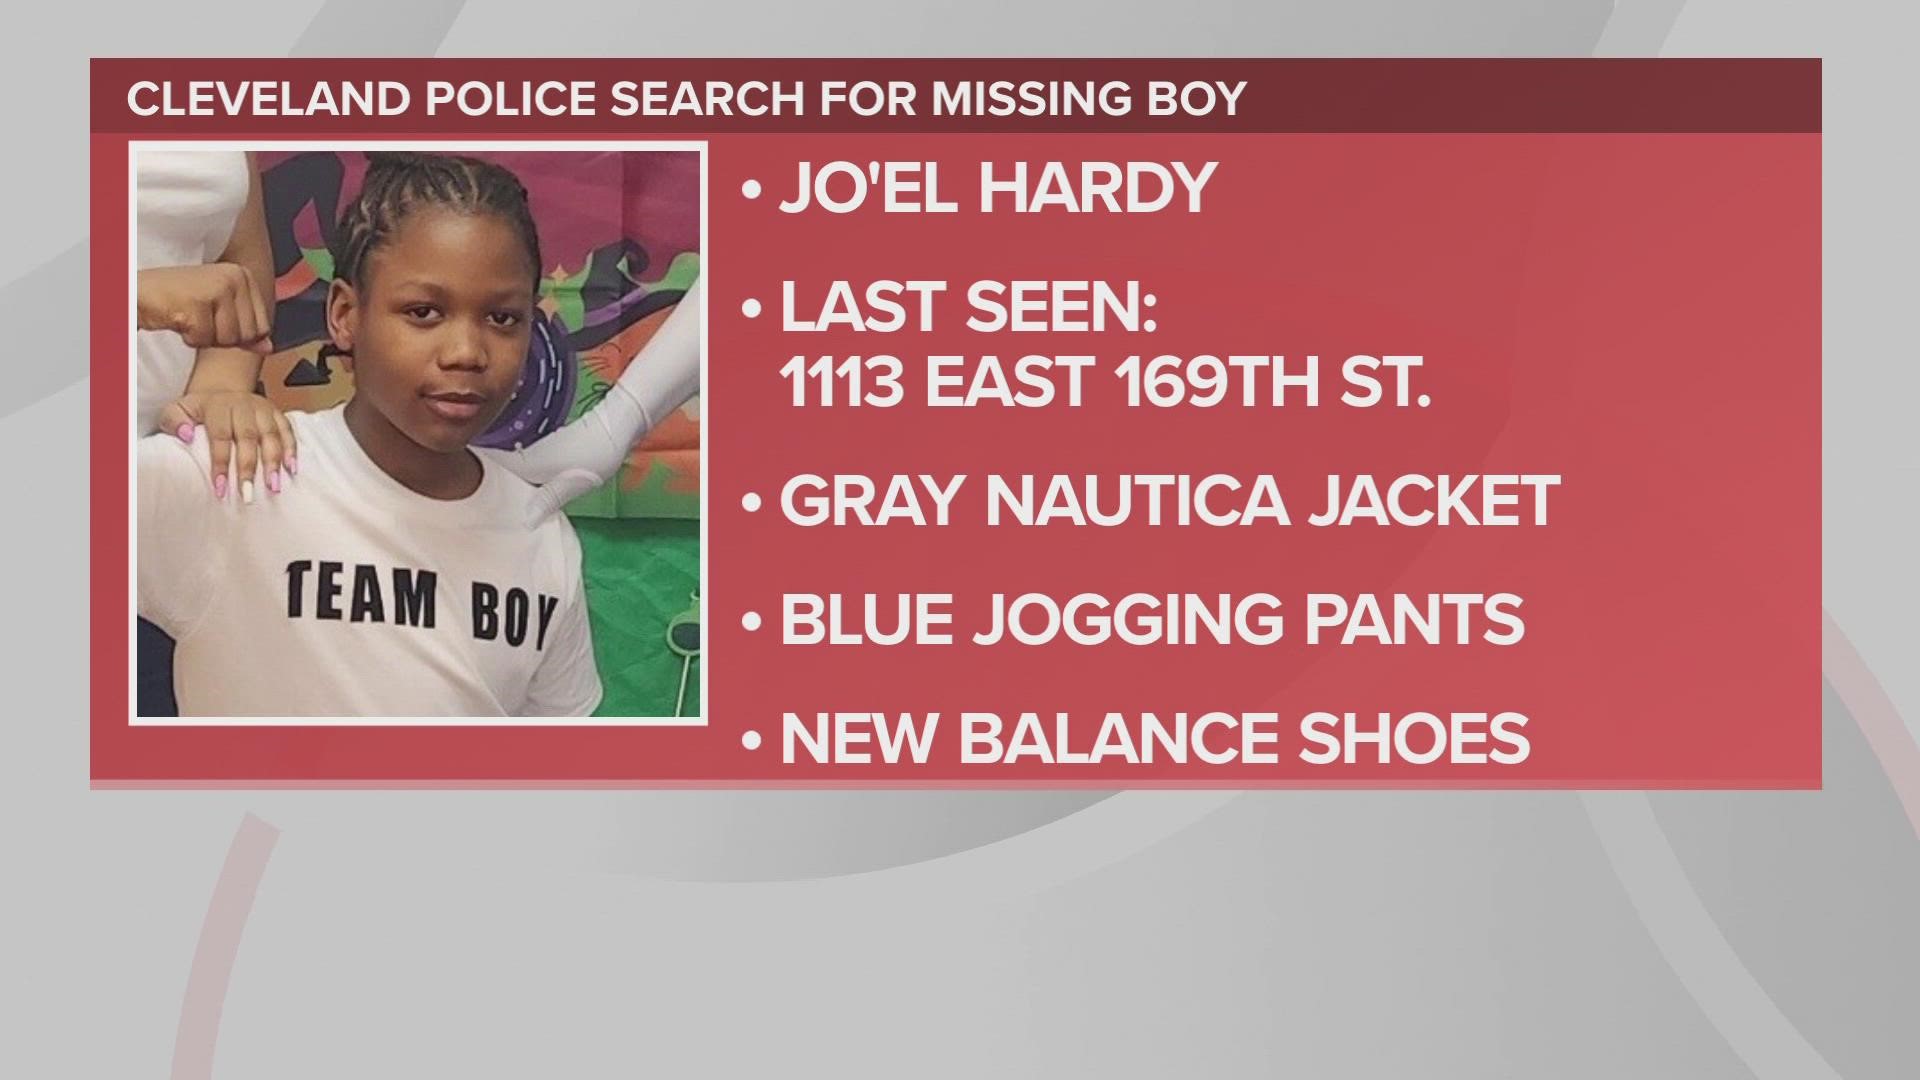 Police say Jo’el Hardy left home on foot in the 1100 block of East 169th Street, according to details released early Monday morning.